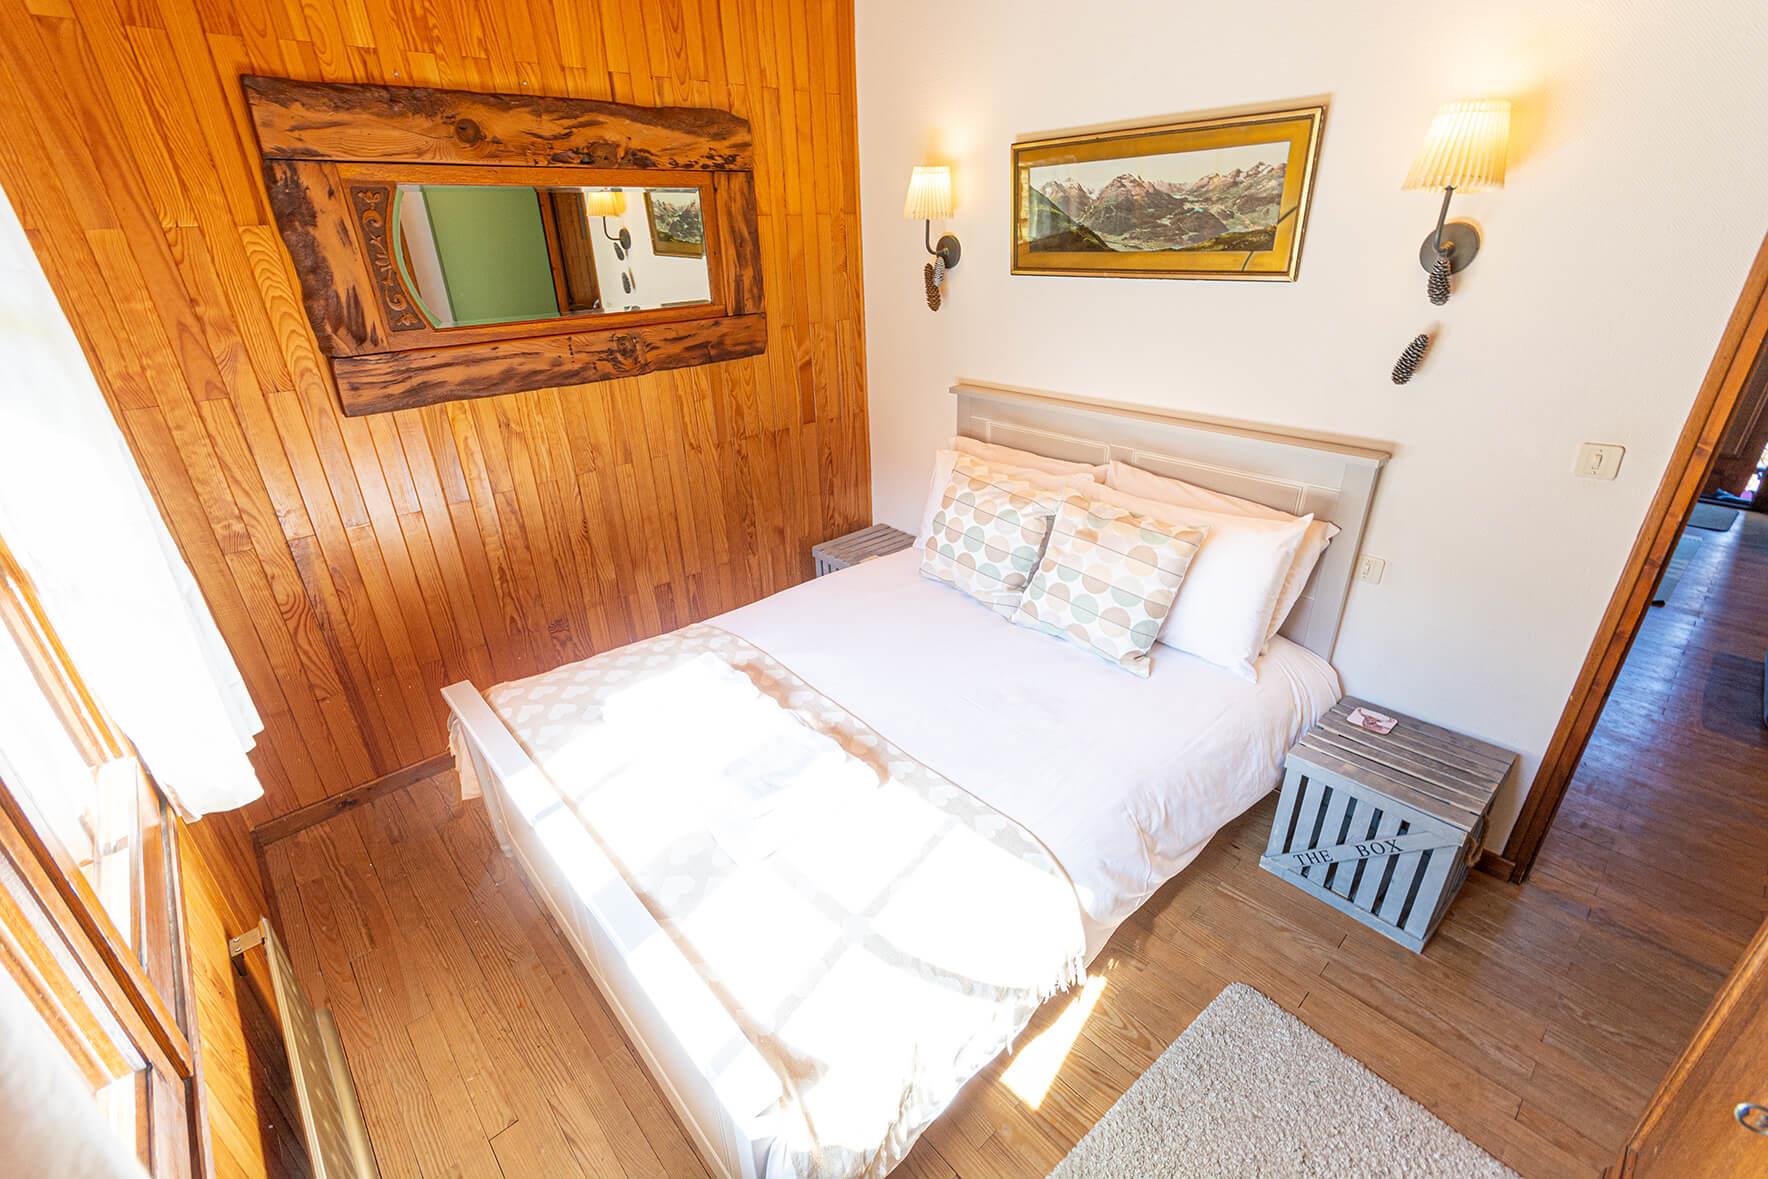 Chalet Le Gerbera La Rivière Enverse - The spacious lower level double bedroom with beautiful views over the garden